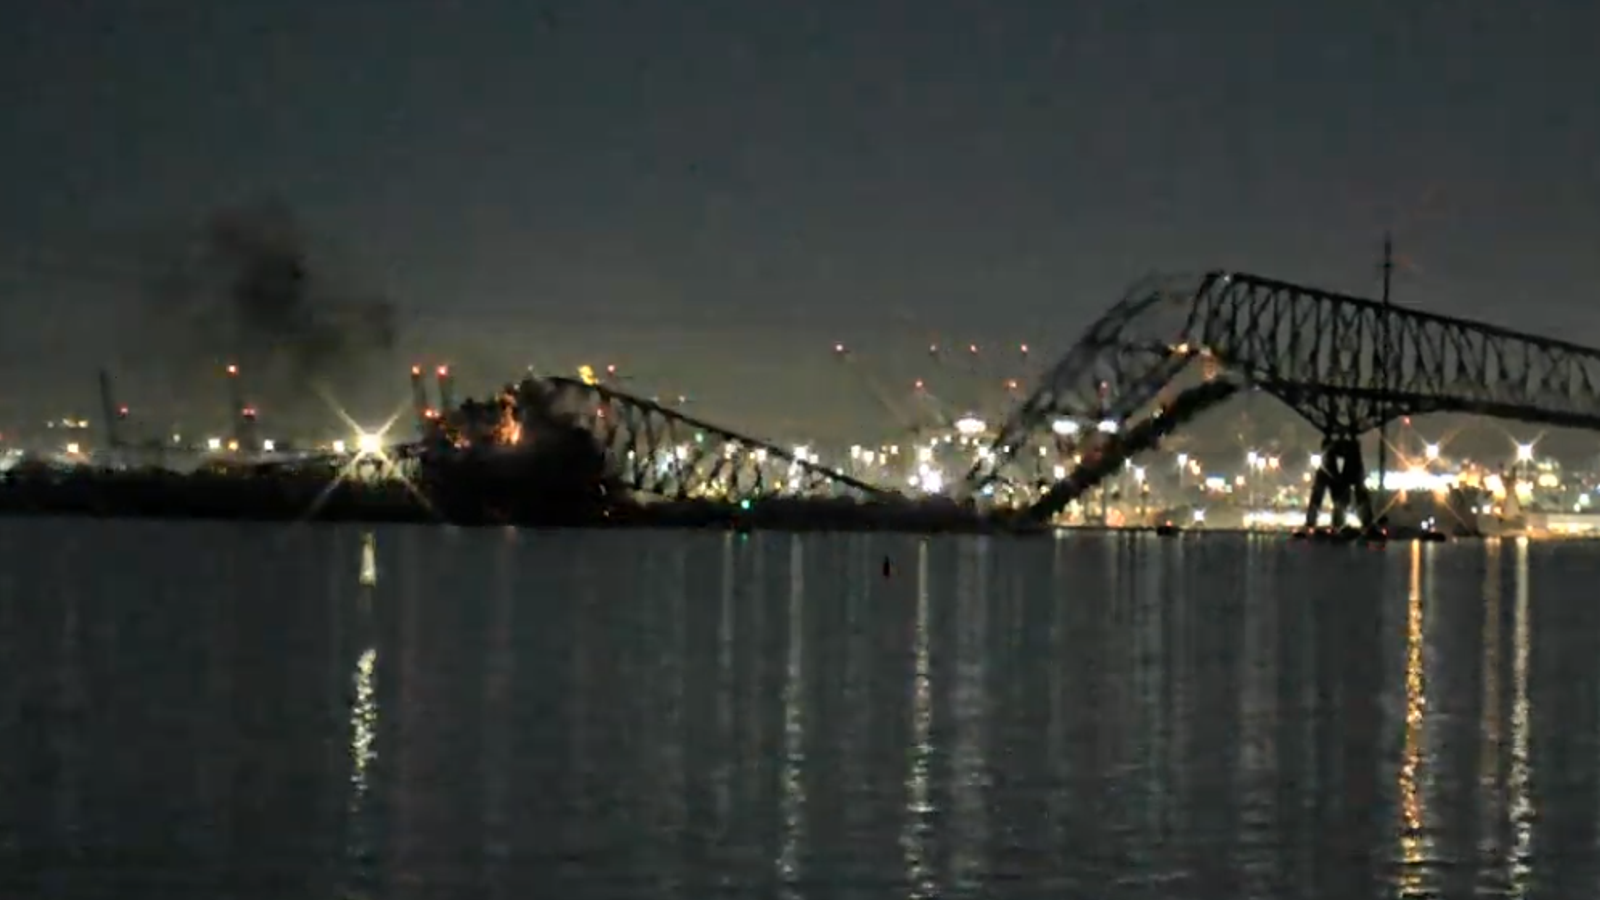 Vehicles fall into water as bridge collapses after being hit by ship in Baltimore